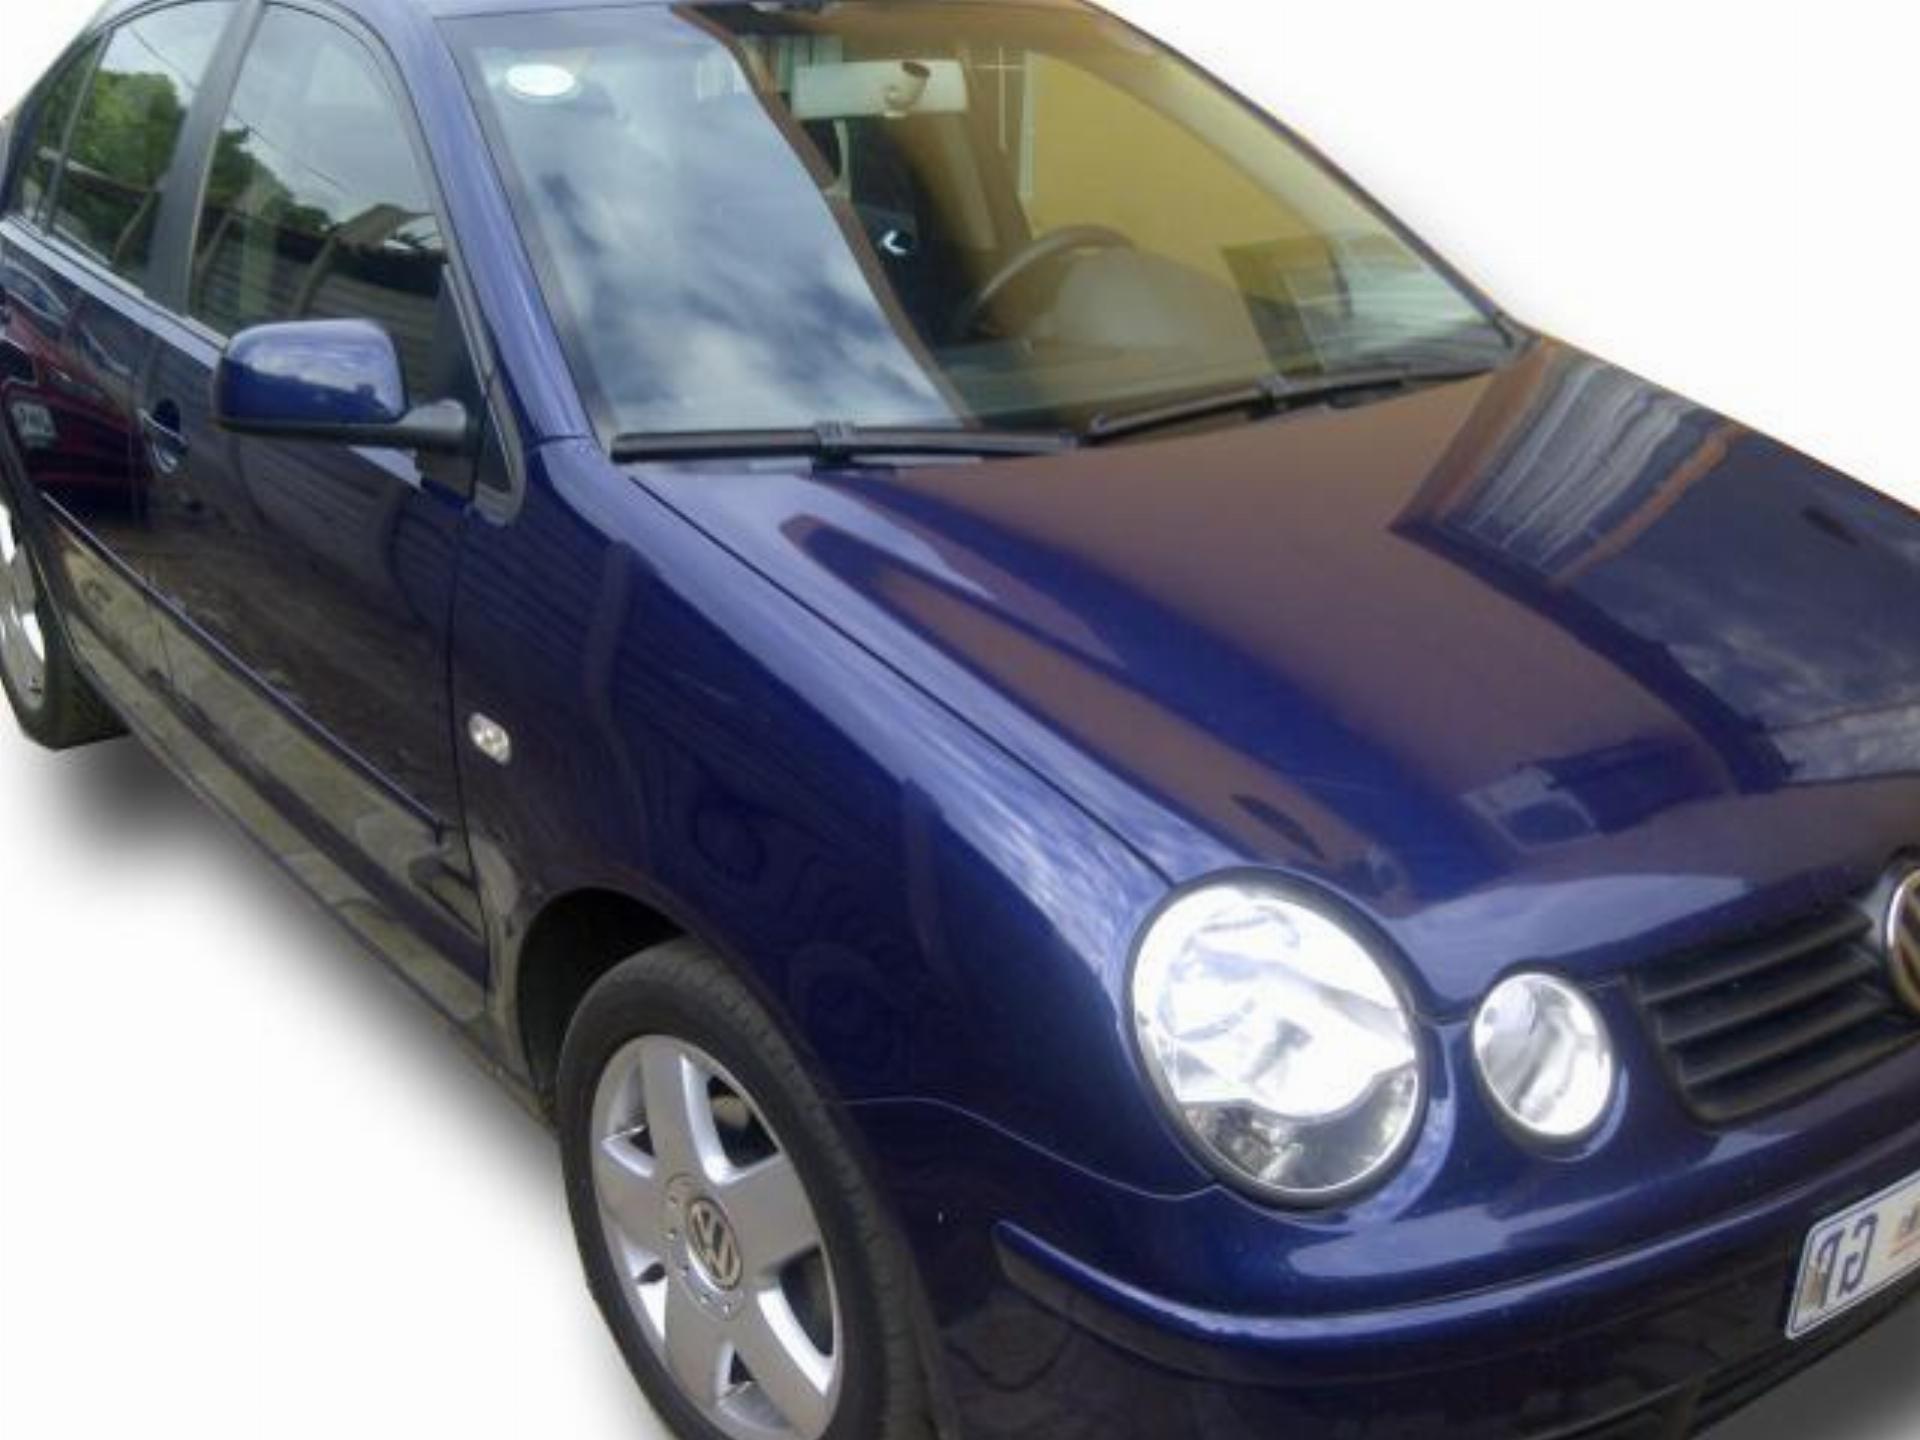 Used VW Polo Classic 1.4 Turbo Diesel 2003 on auction